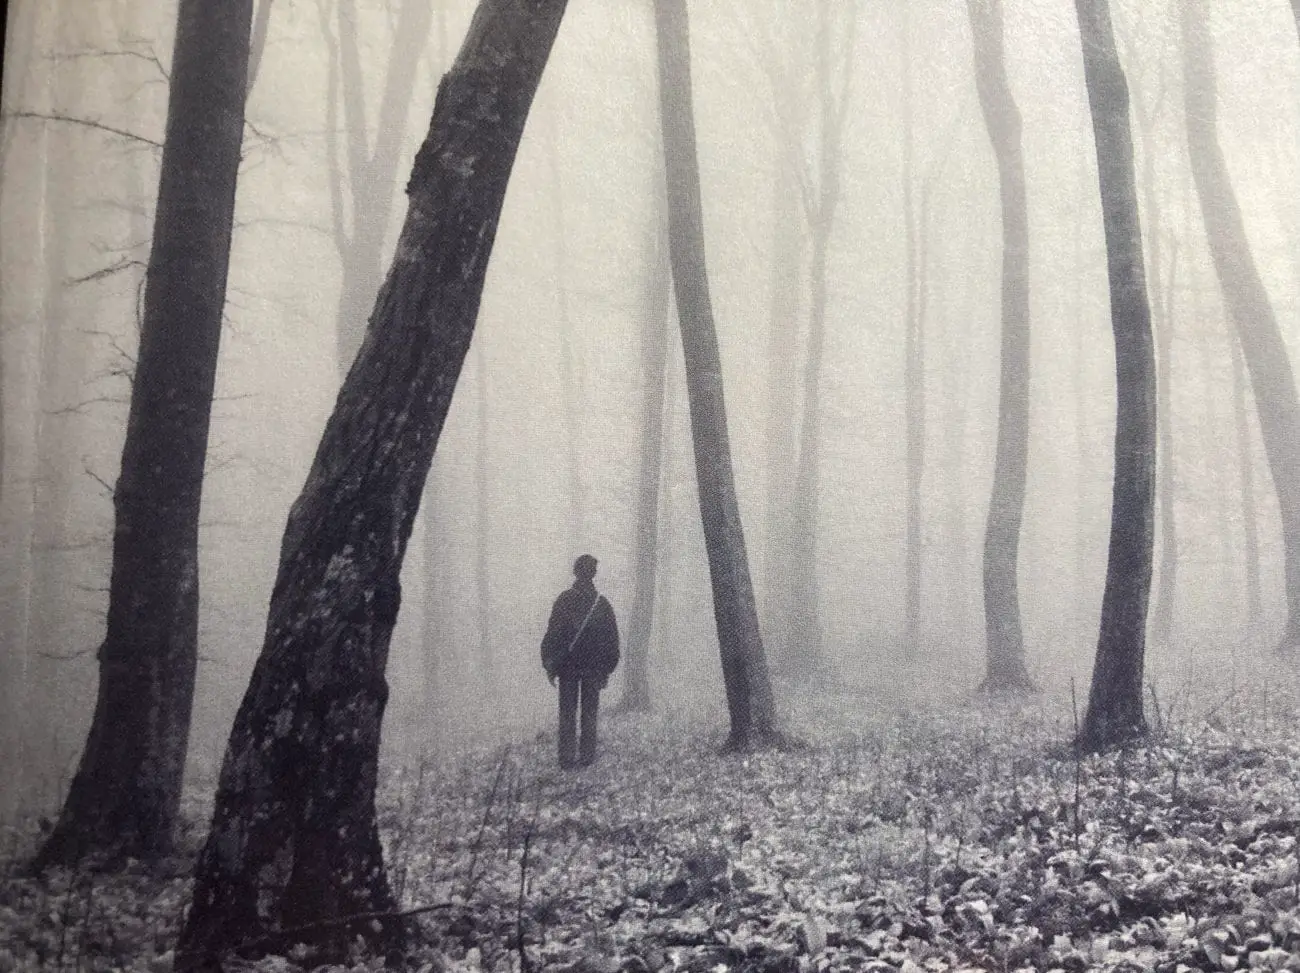 A lone figure stands in a misty forest with bent trees